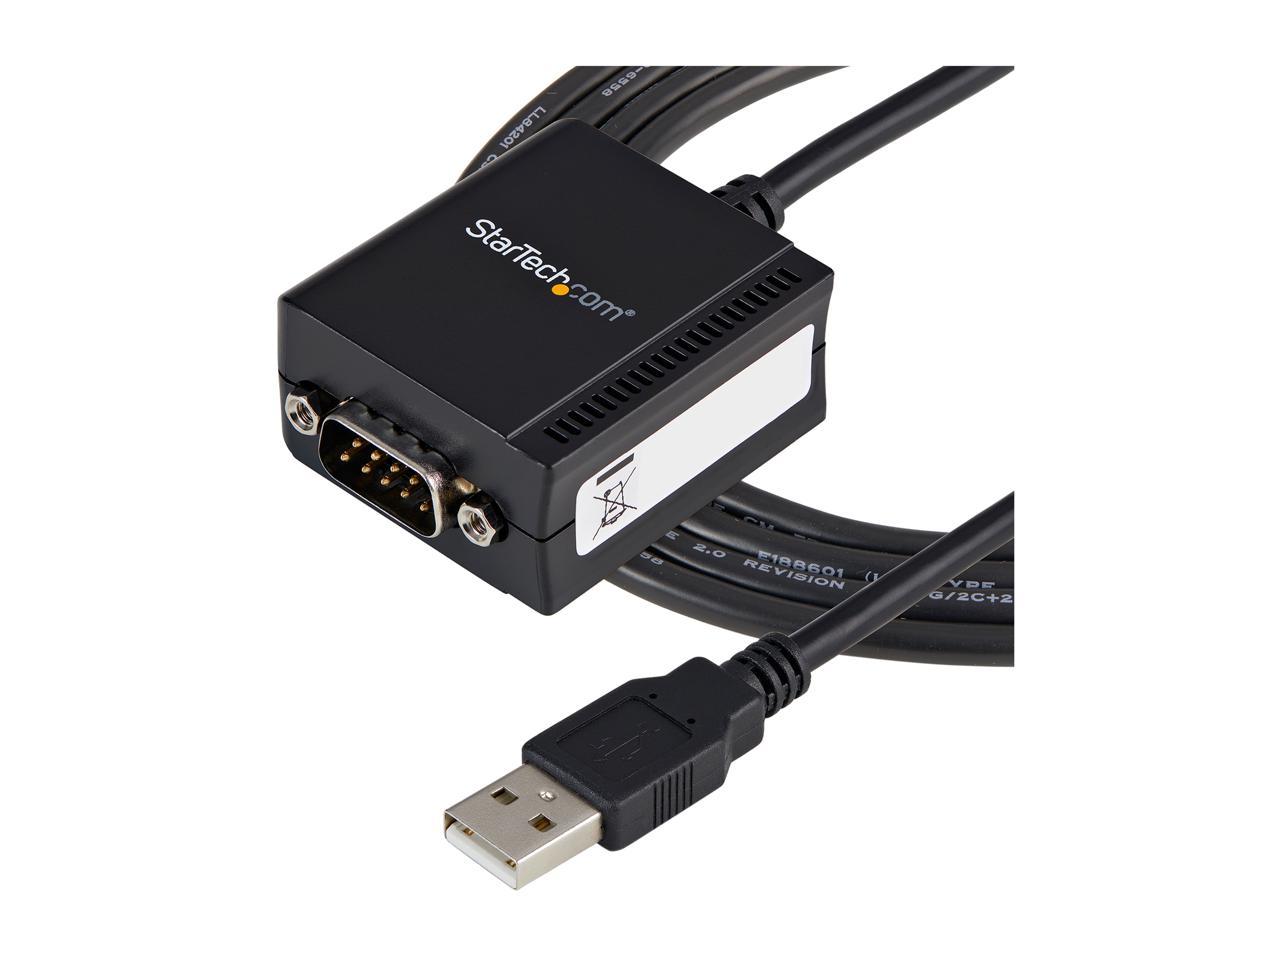 StarTech.com USB to Serial Adapter - 1 port - USB Powered - FTDI USB UART Chip - DB9 (9-pin) - USB to RS232 Adapter - image 4 of 5